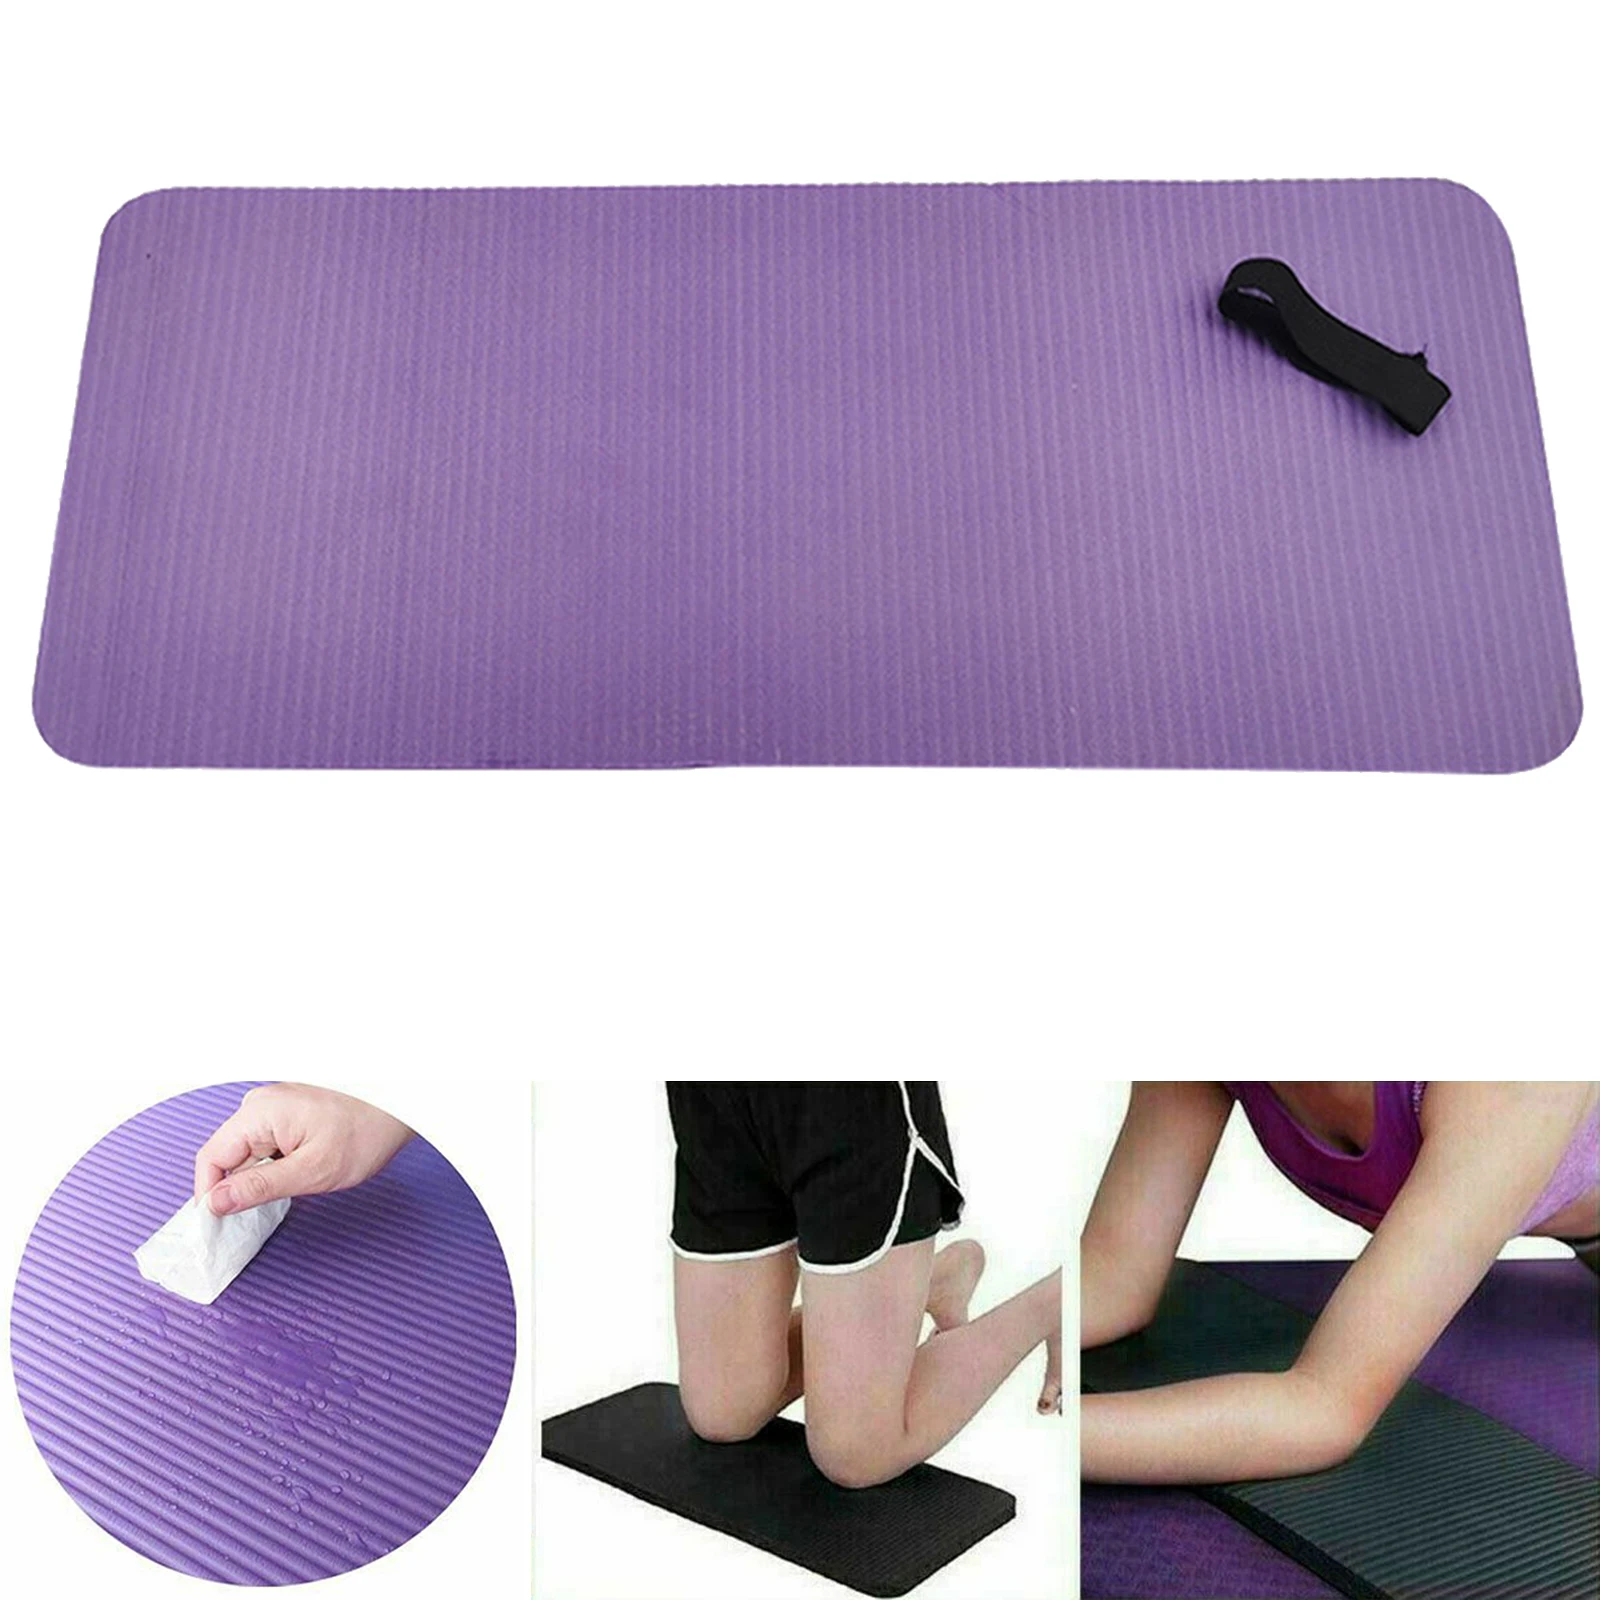 Yoga Mat Knee Pad Cushion Thick for Fitness Plank Pilates Travel Floor 